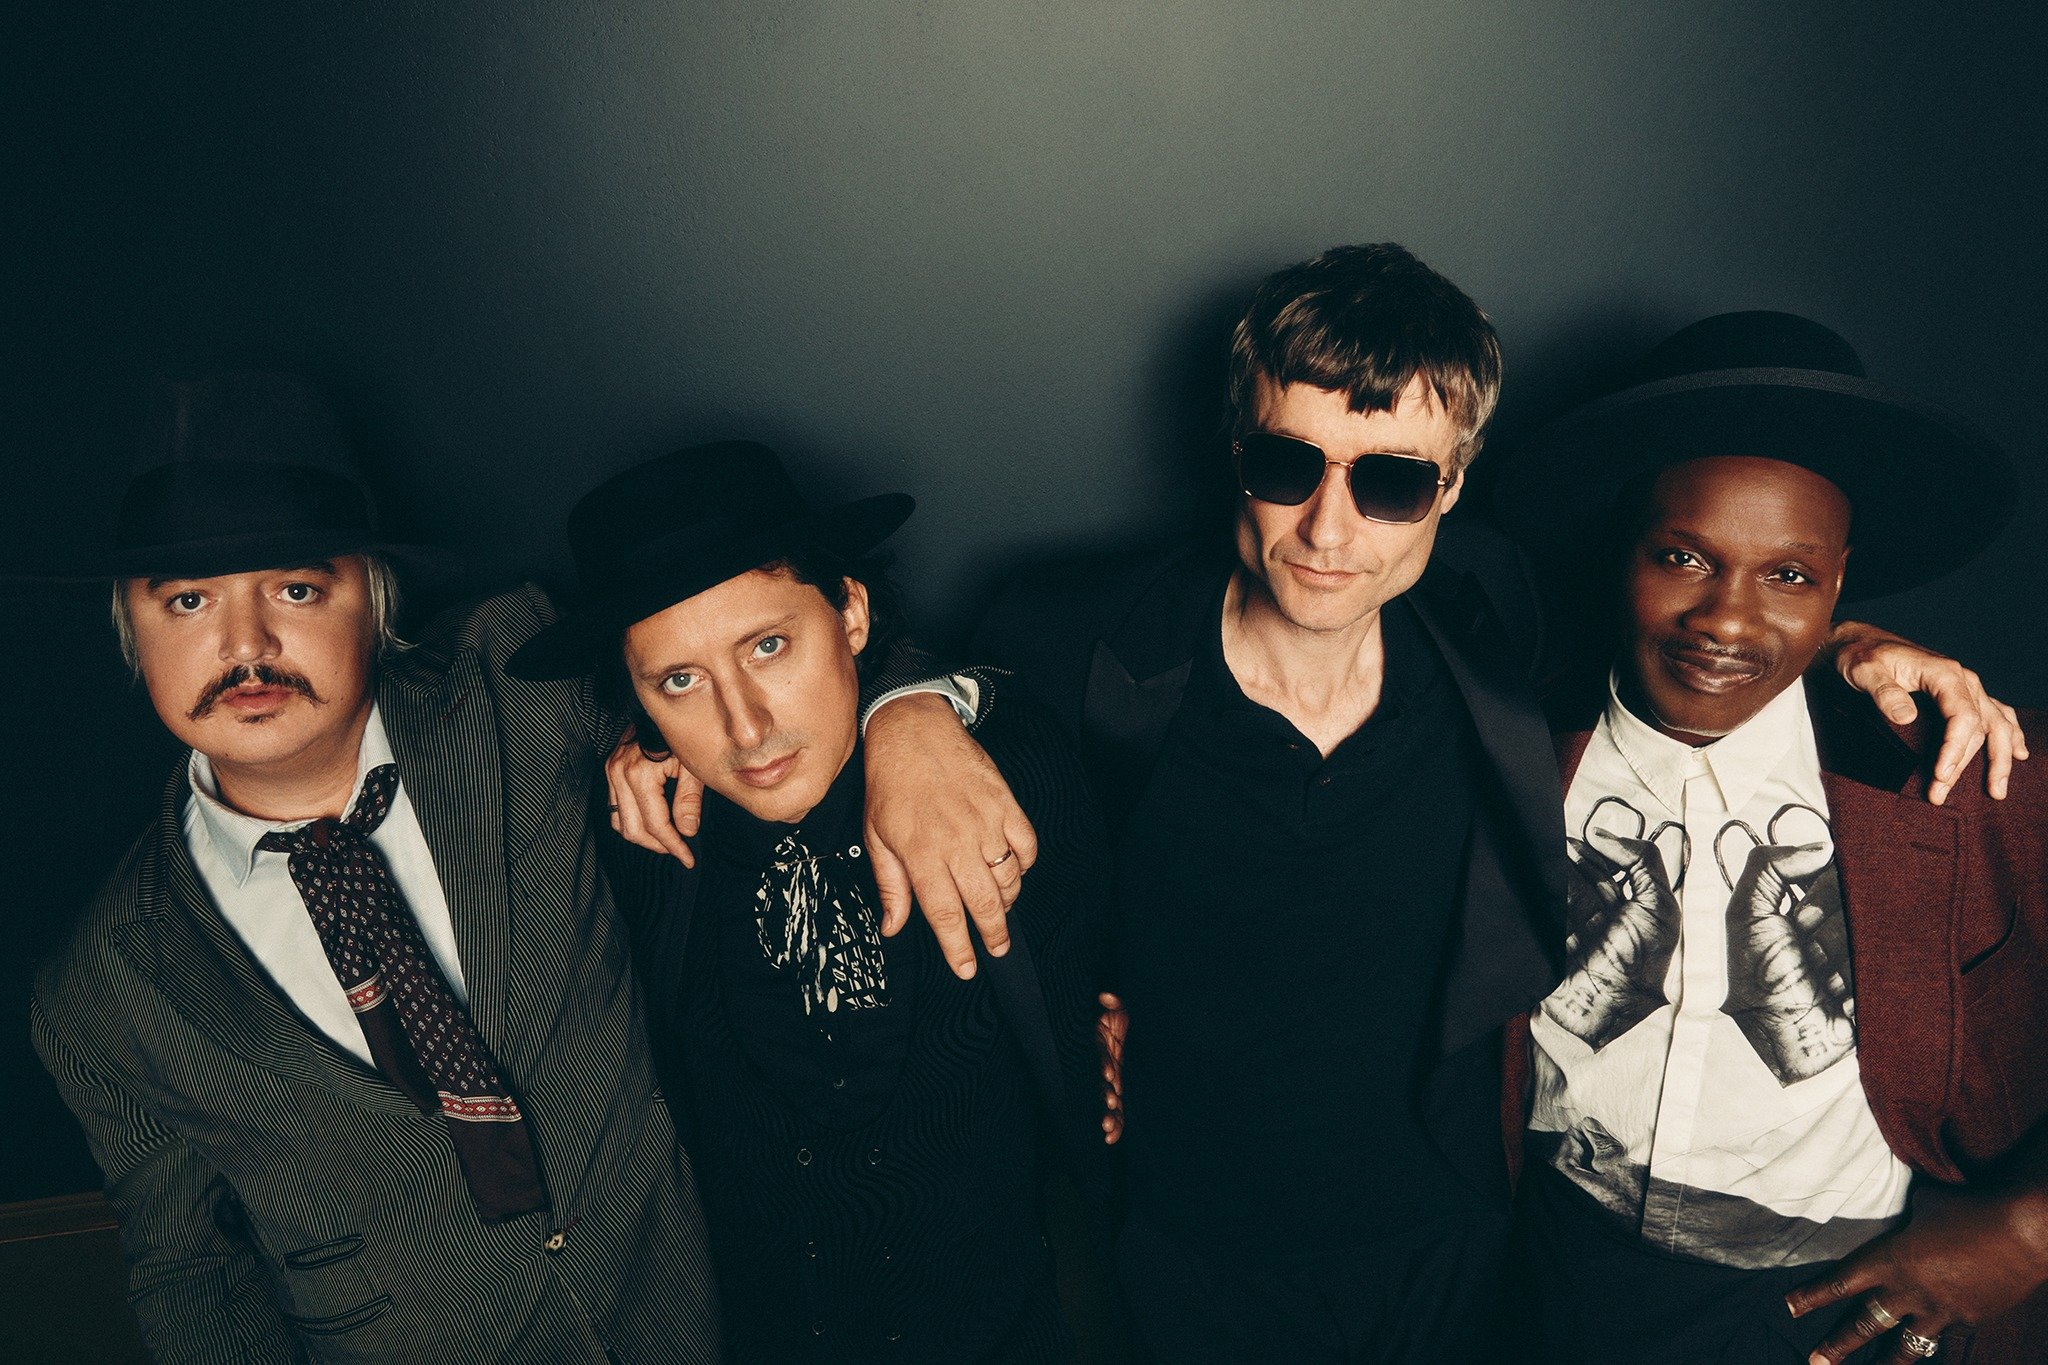 The Libertines (@thelibertines) share first studio album in 9 years 'All Quiet On The Eastern Esplanade'.

Read via the link in bio.

-
-
#music #albumreview #thelibertines #allquietontheeasternesplanade #newmusic #rockmusic #theindiescene